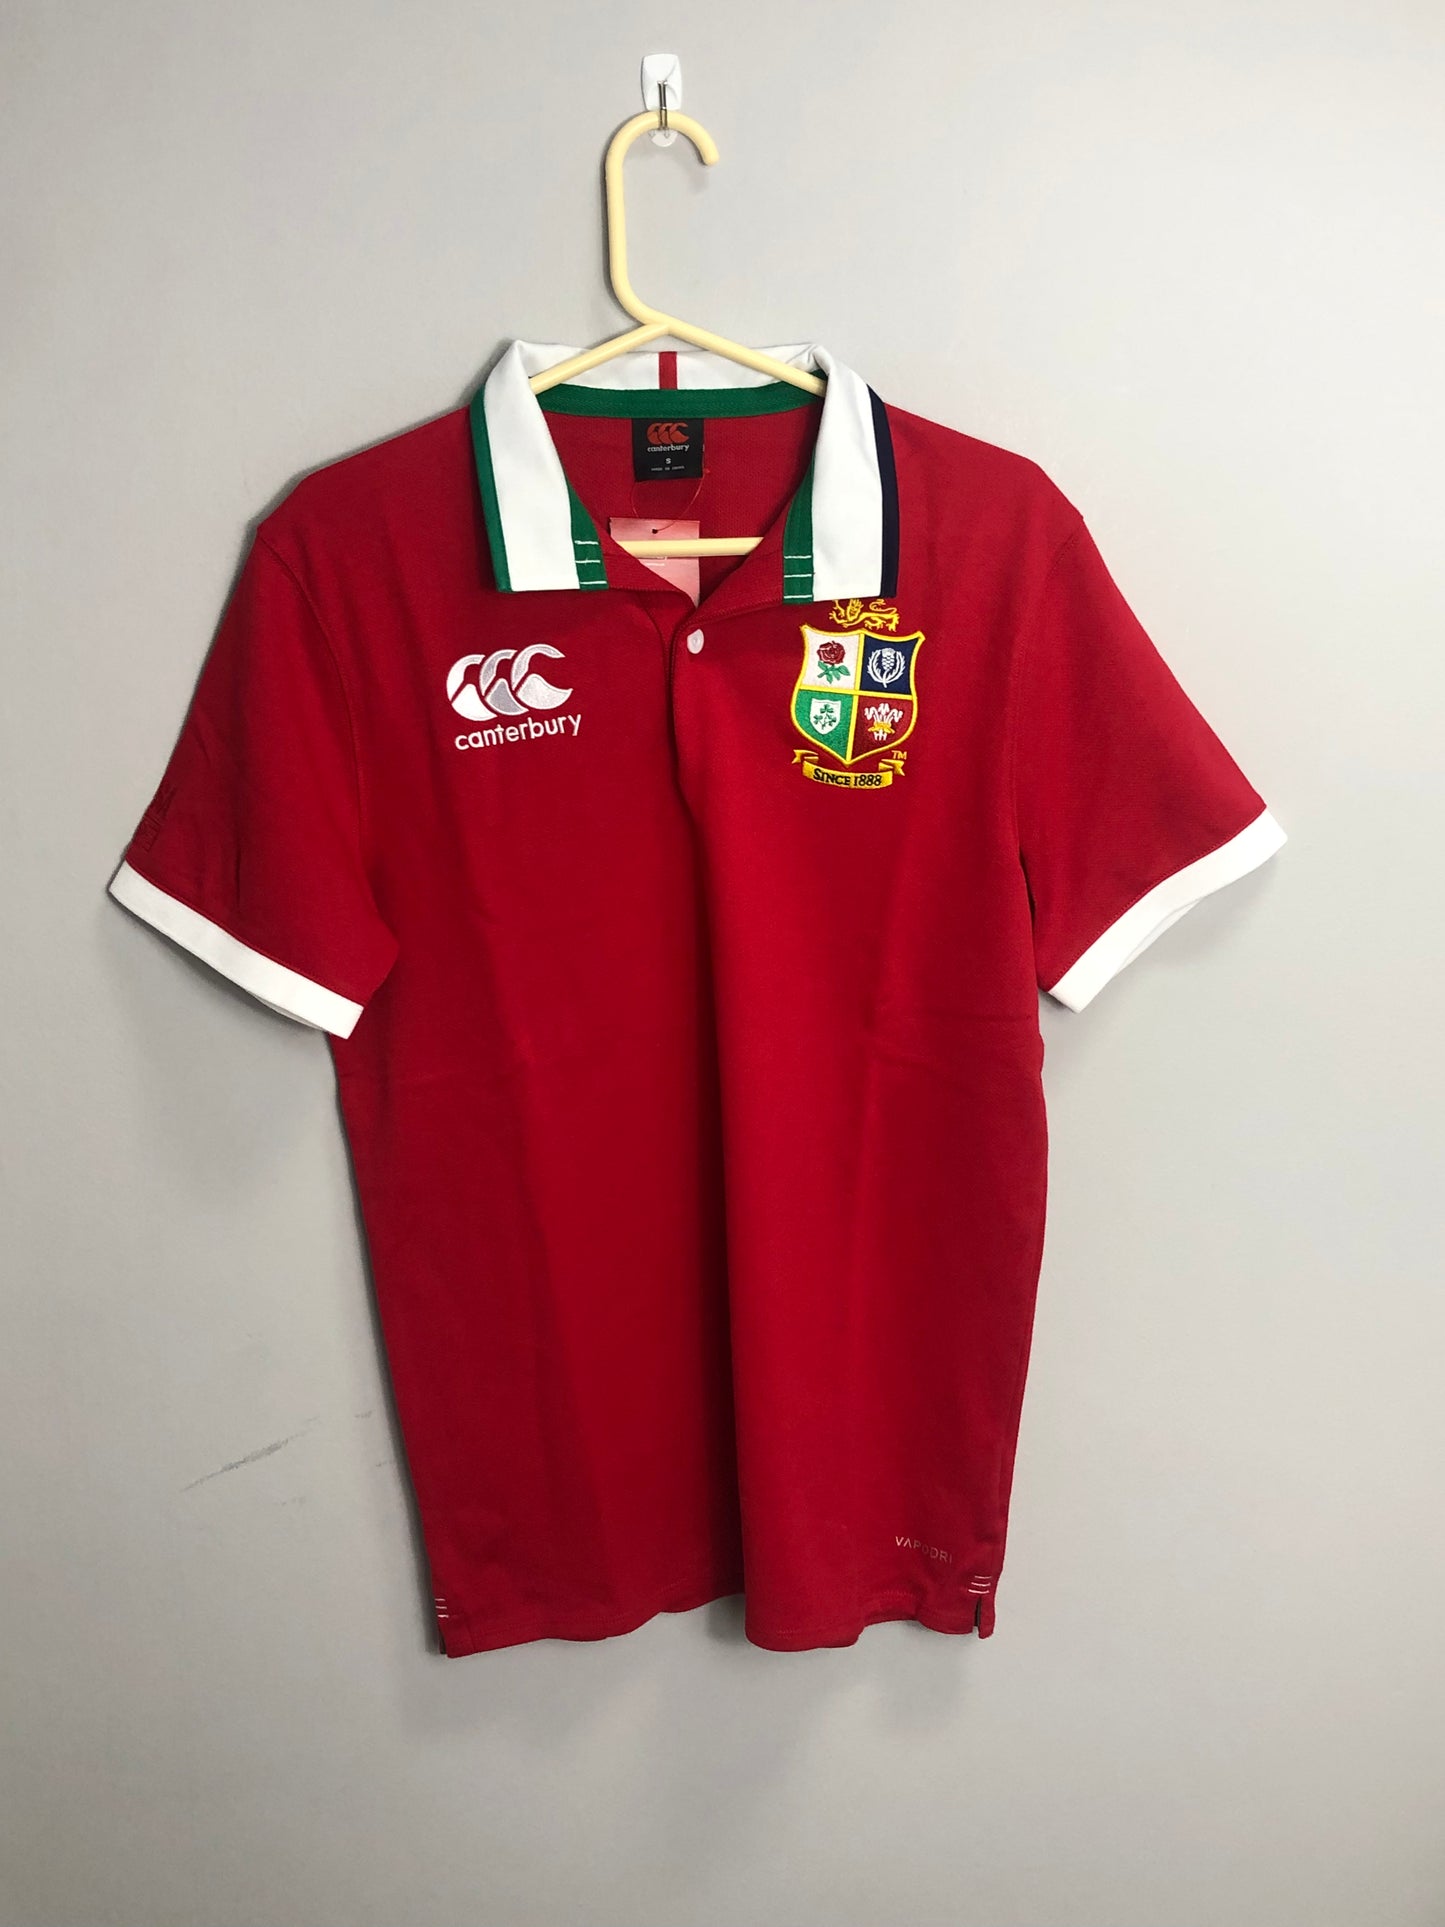 British & Irish Lions Classic Short Sleeve Shirt - 39” Chest - Small - New with tags